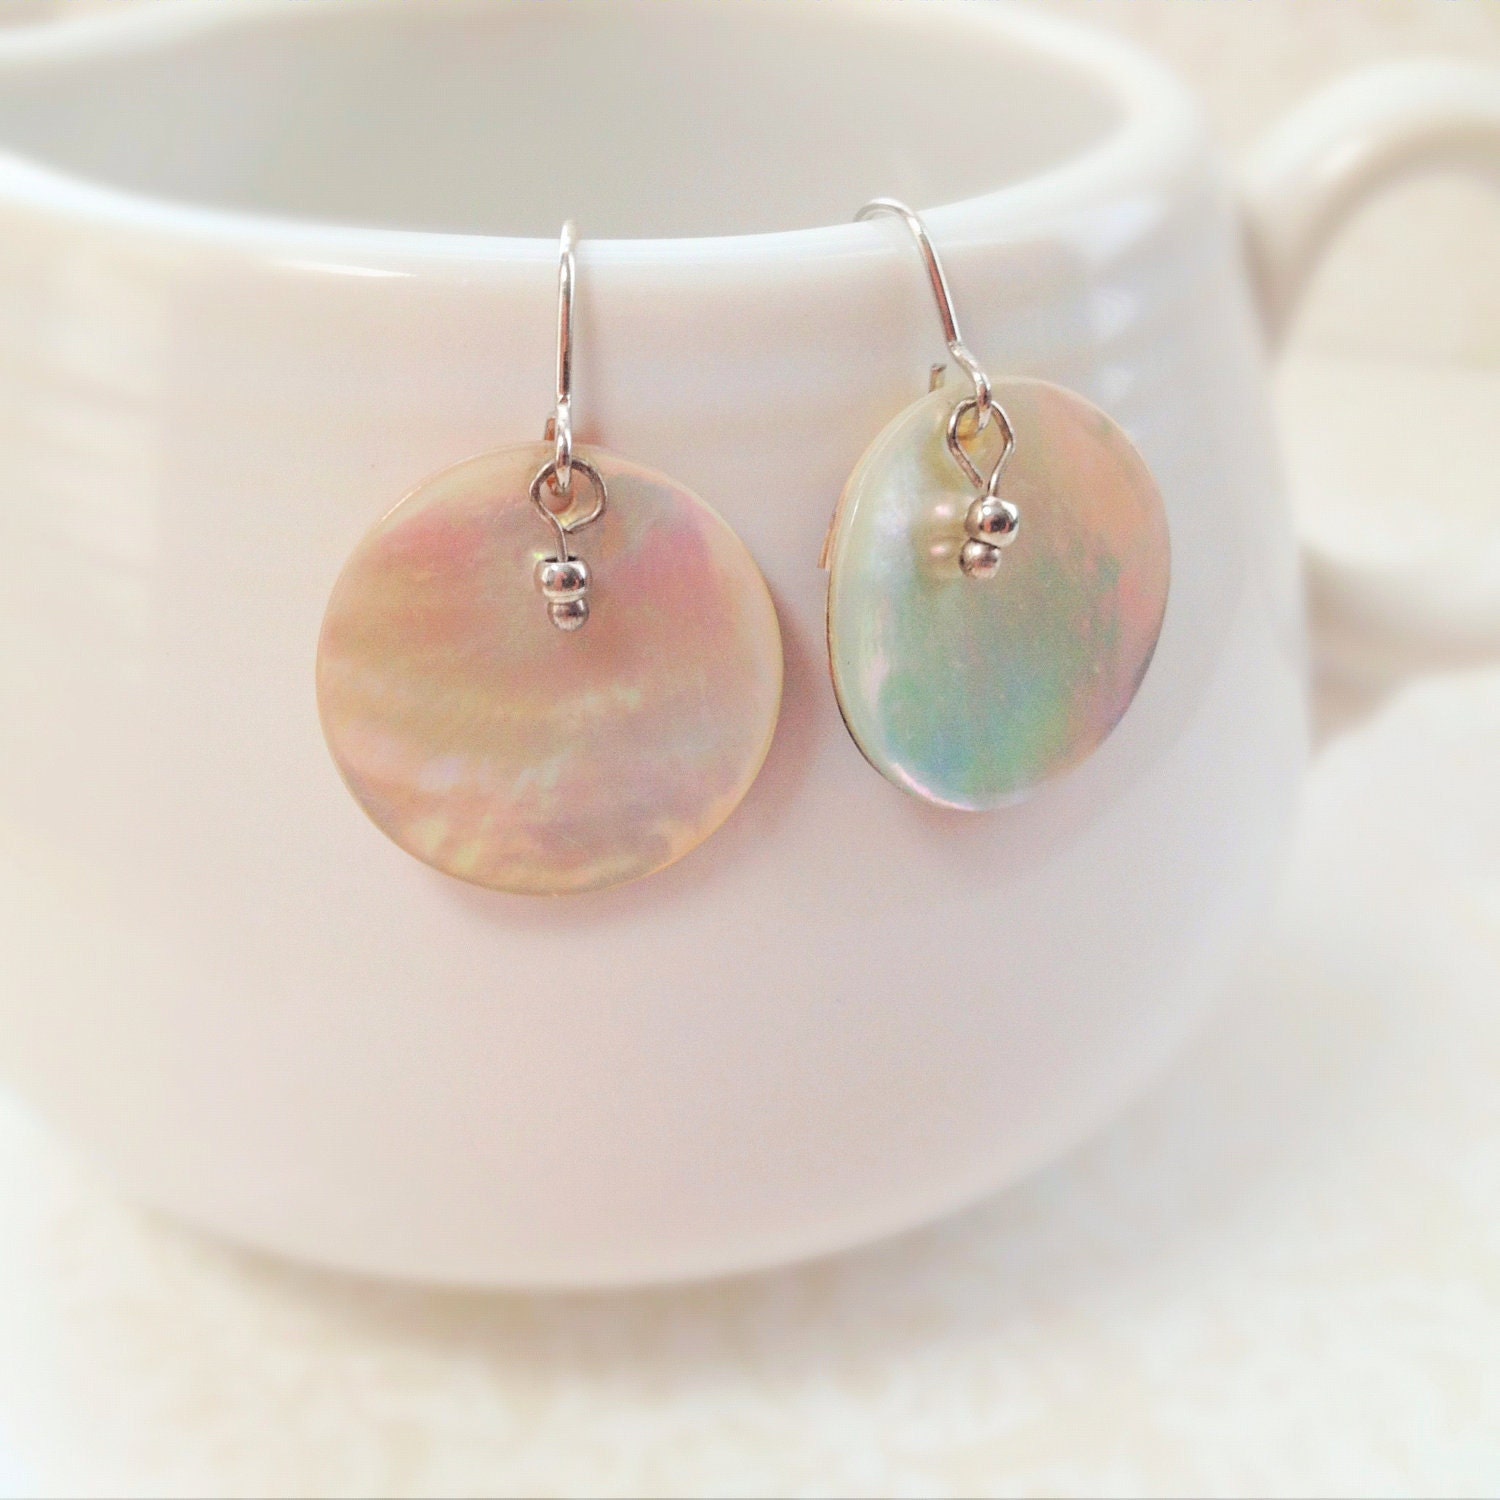 Round Seashell Earrings. Iridescent. Beach. Shell. Abalone. Nautical. Silver. Hook Earrings. Small Earrings. Elegant. Summer. Gifts for Her. - MintMarbles